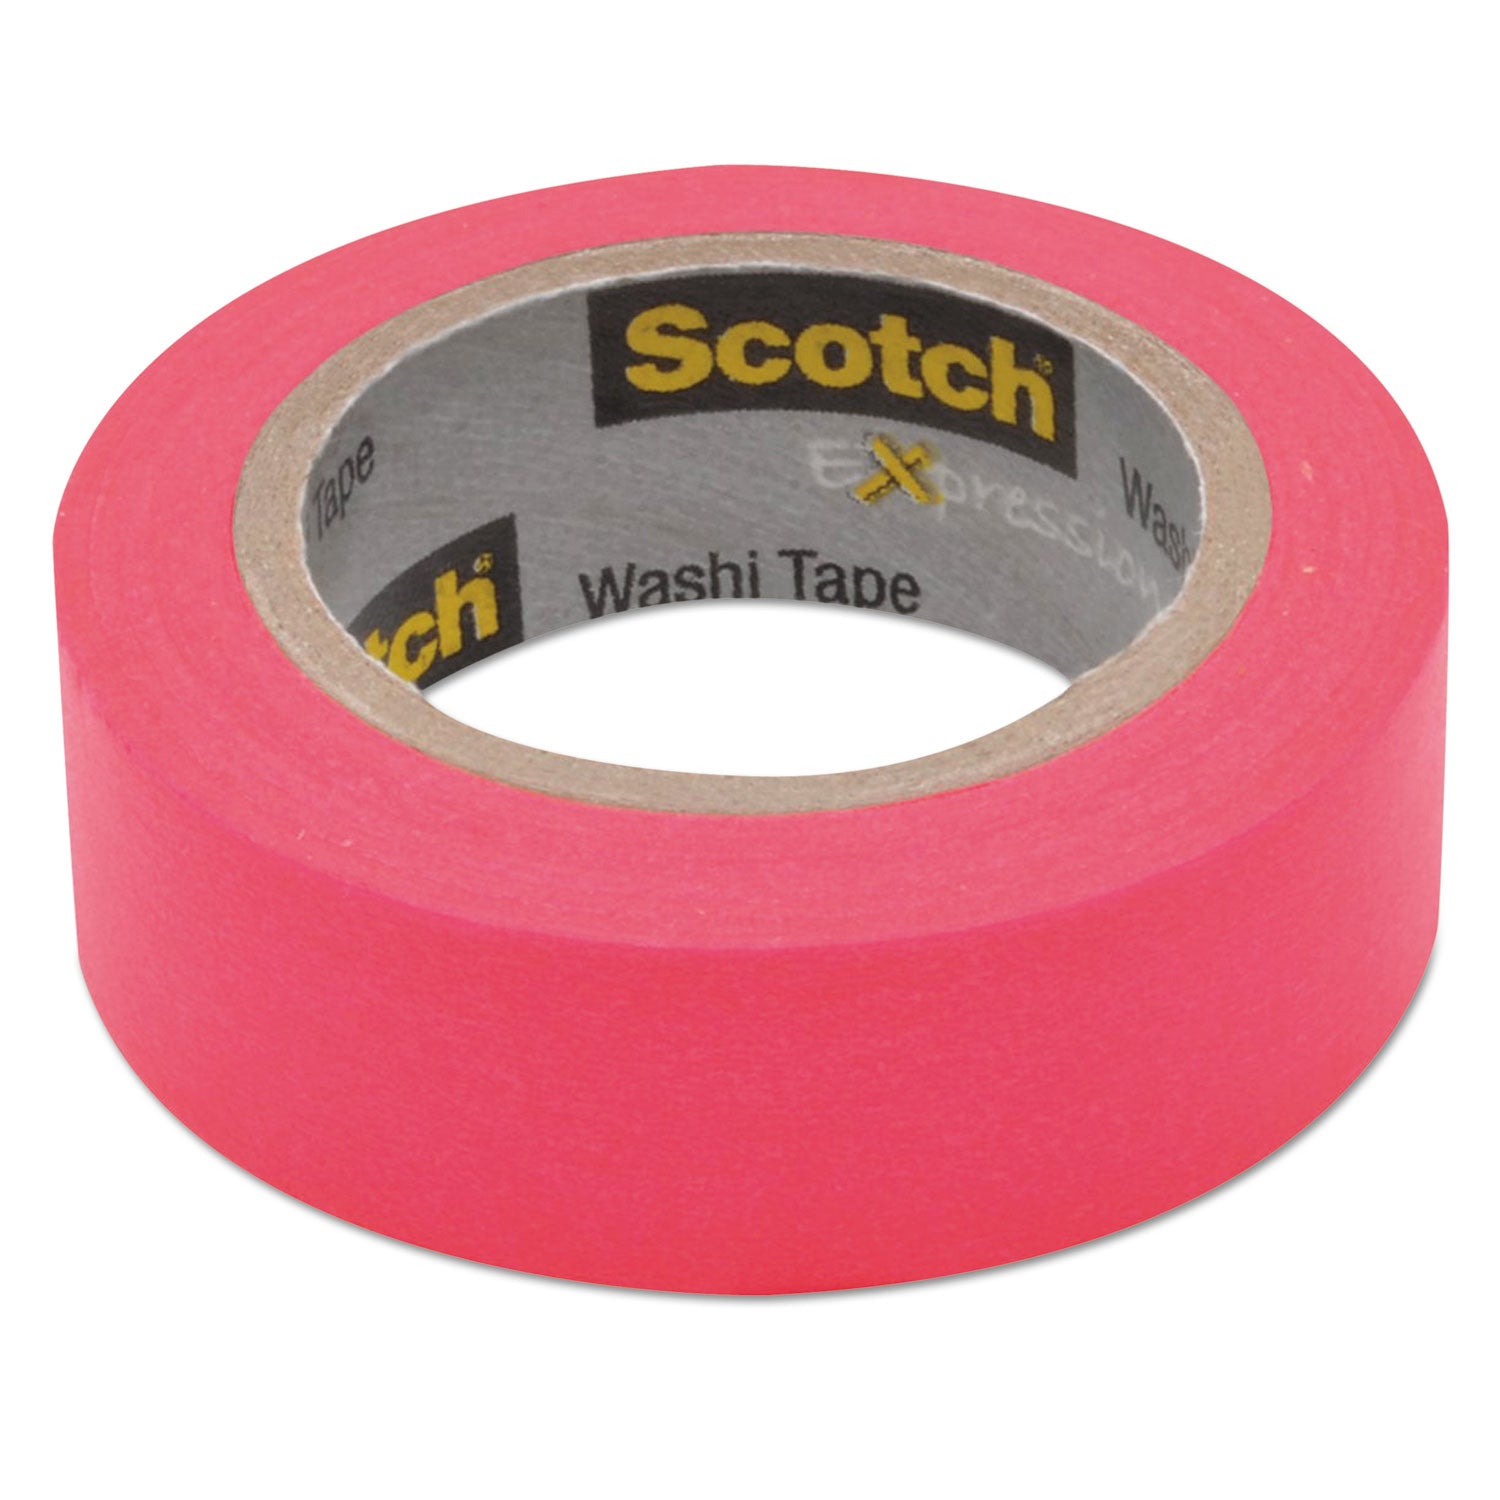 expressions-washi-tape-125-core-059-x-3275-ft-neon-pink_mmmc314pnk - 2